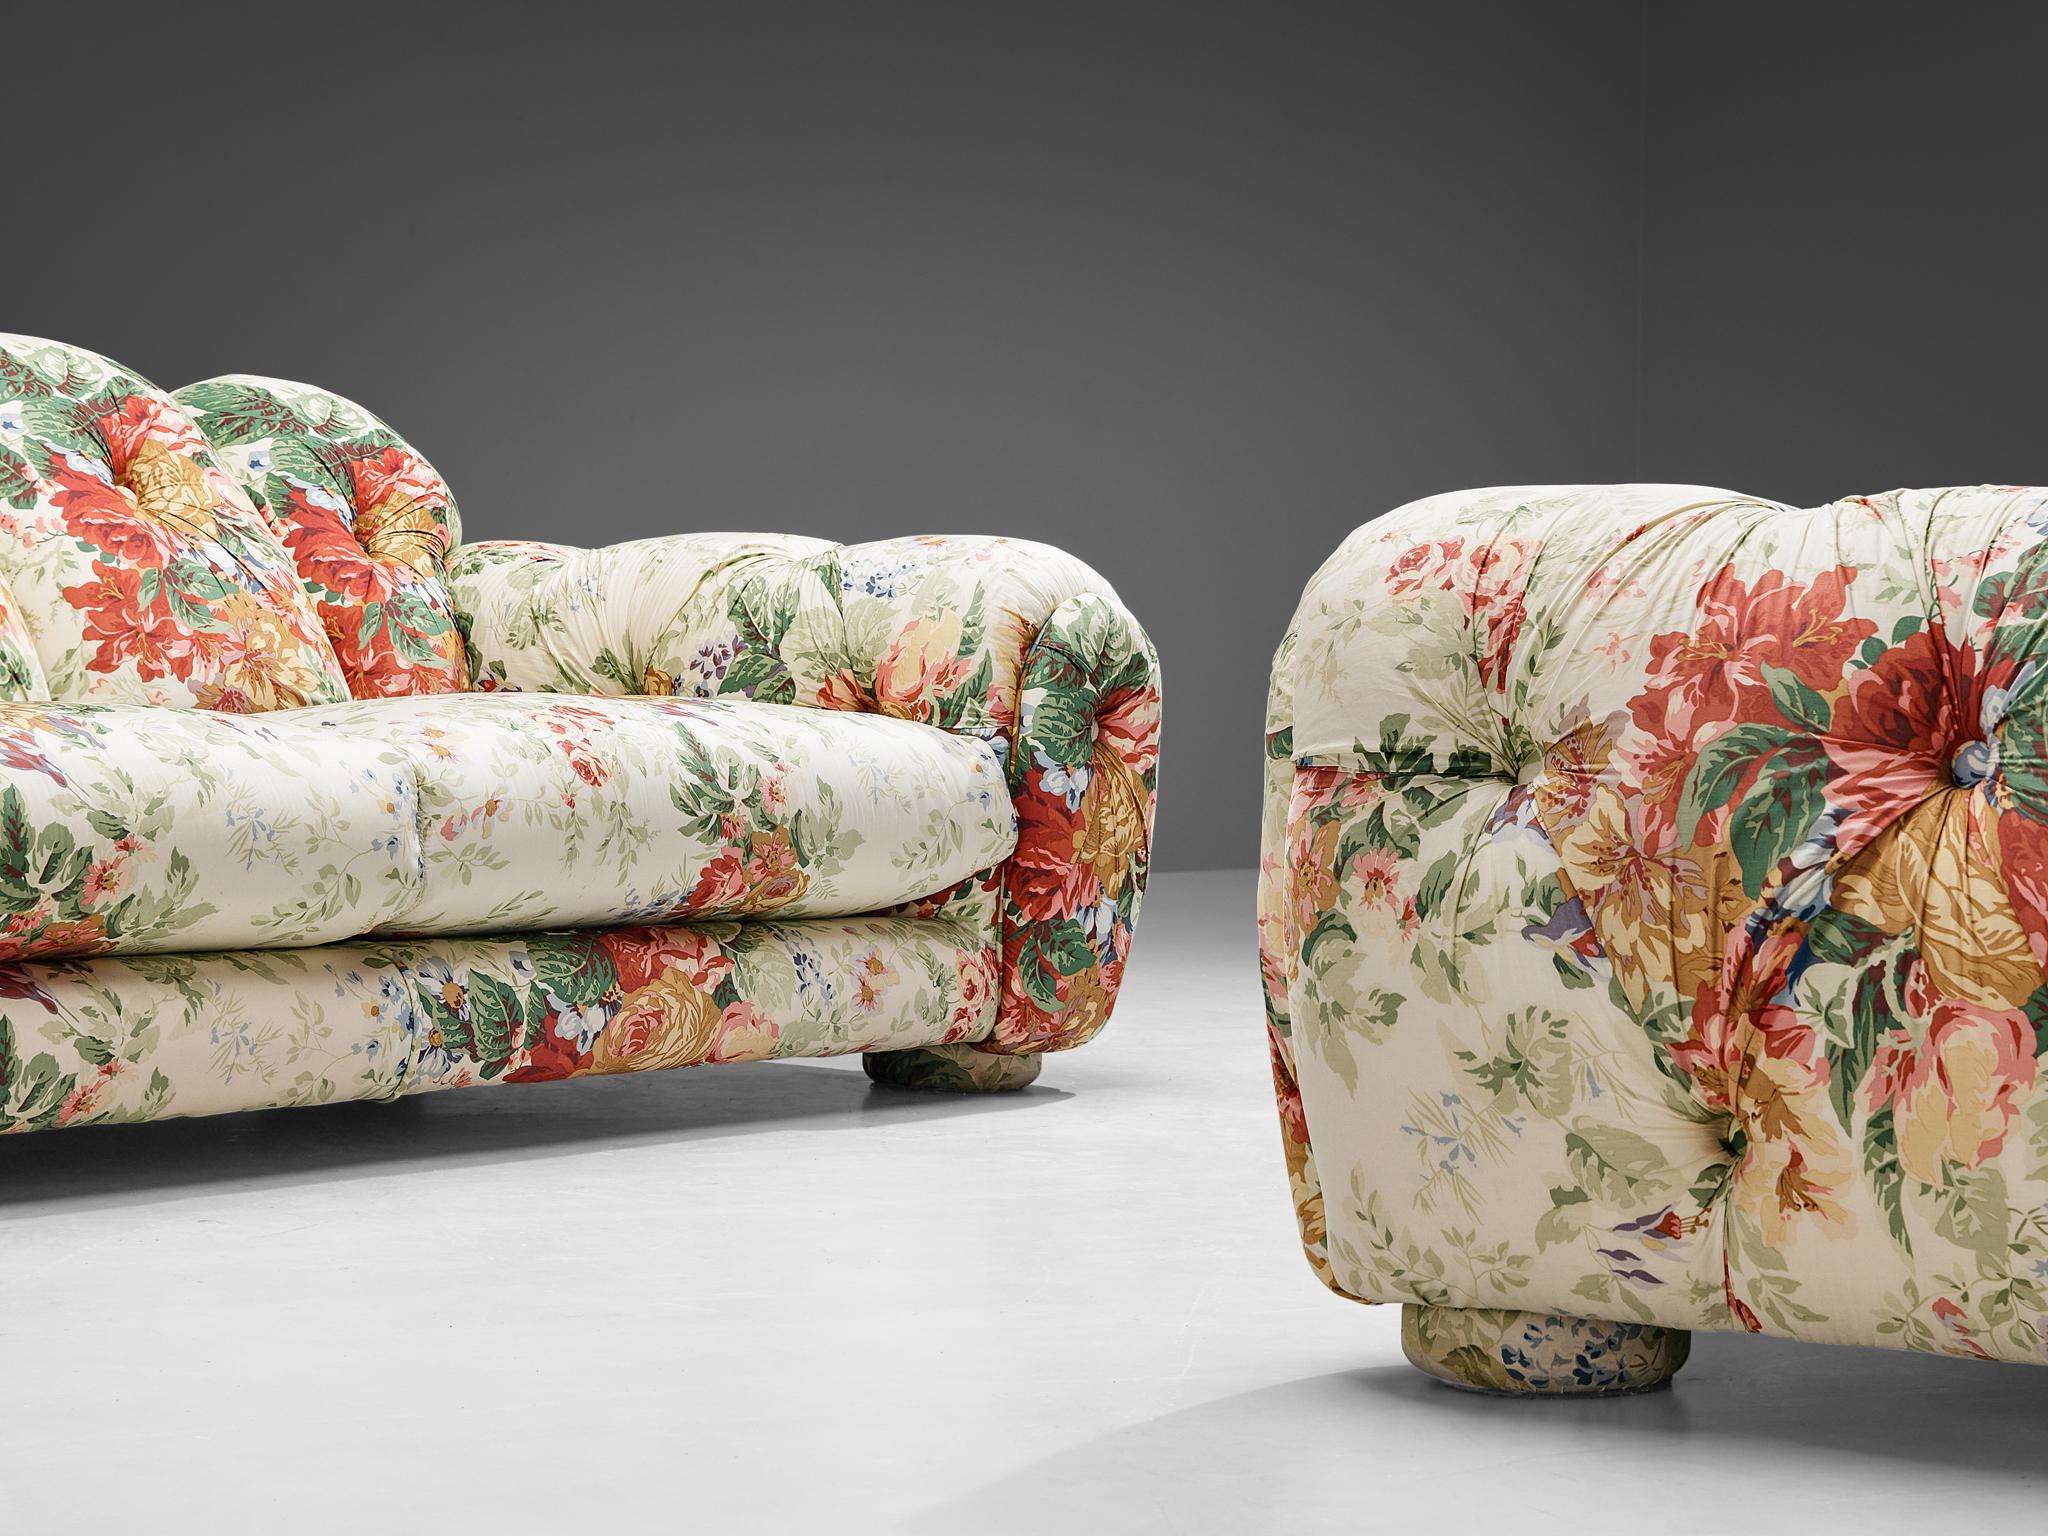 Vivai Del Sud 'Superstar' Lounge Chair in Floral Upholstery 6